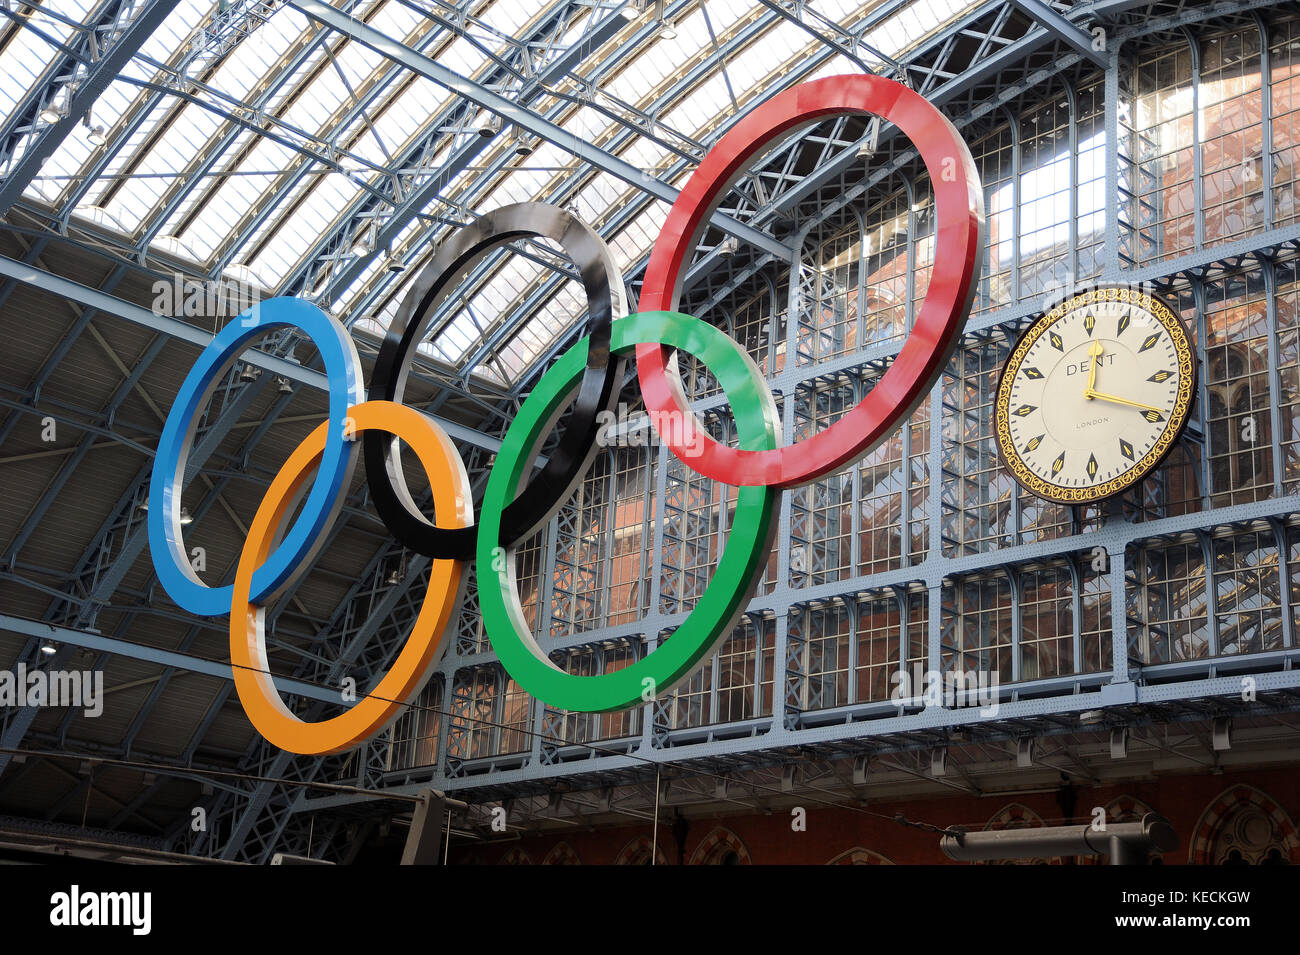 The Olympic Rings under the trainshed roof at St. Pancras Station. London. Stock Photo